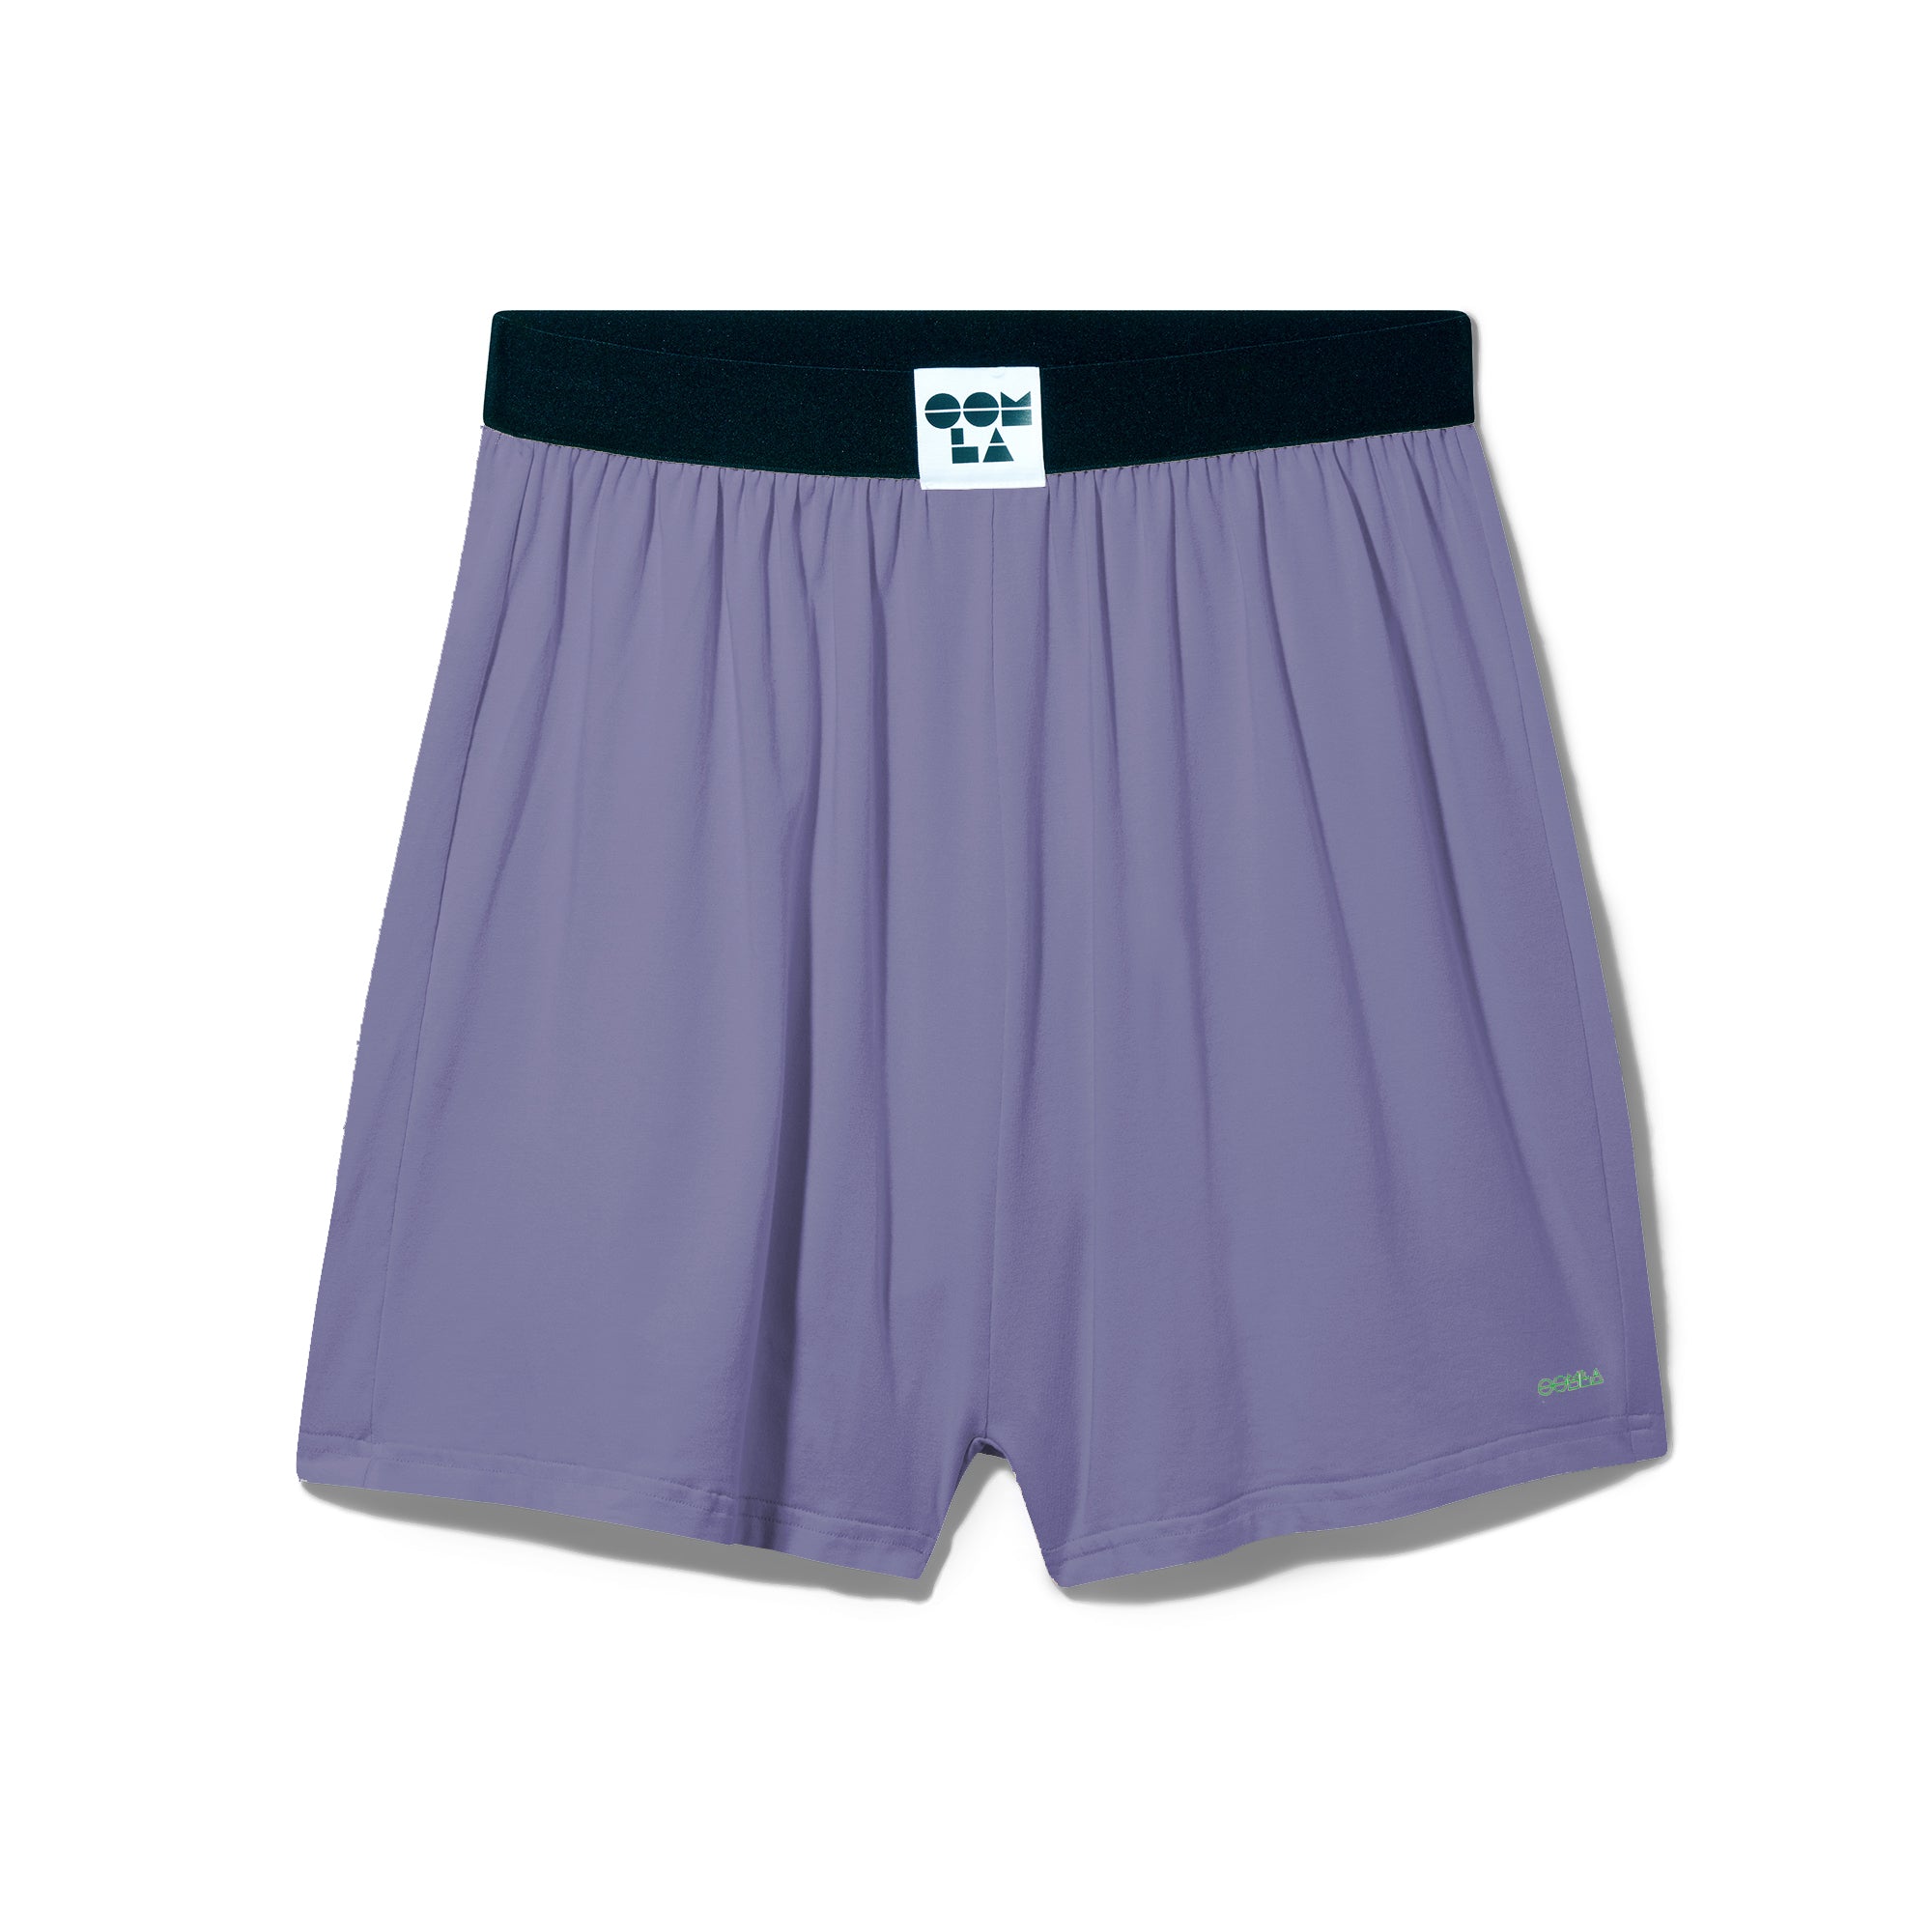 NEW! Lilac OOMSHORTS